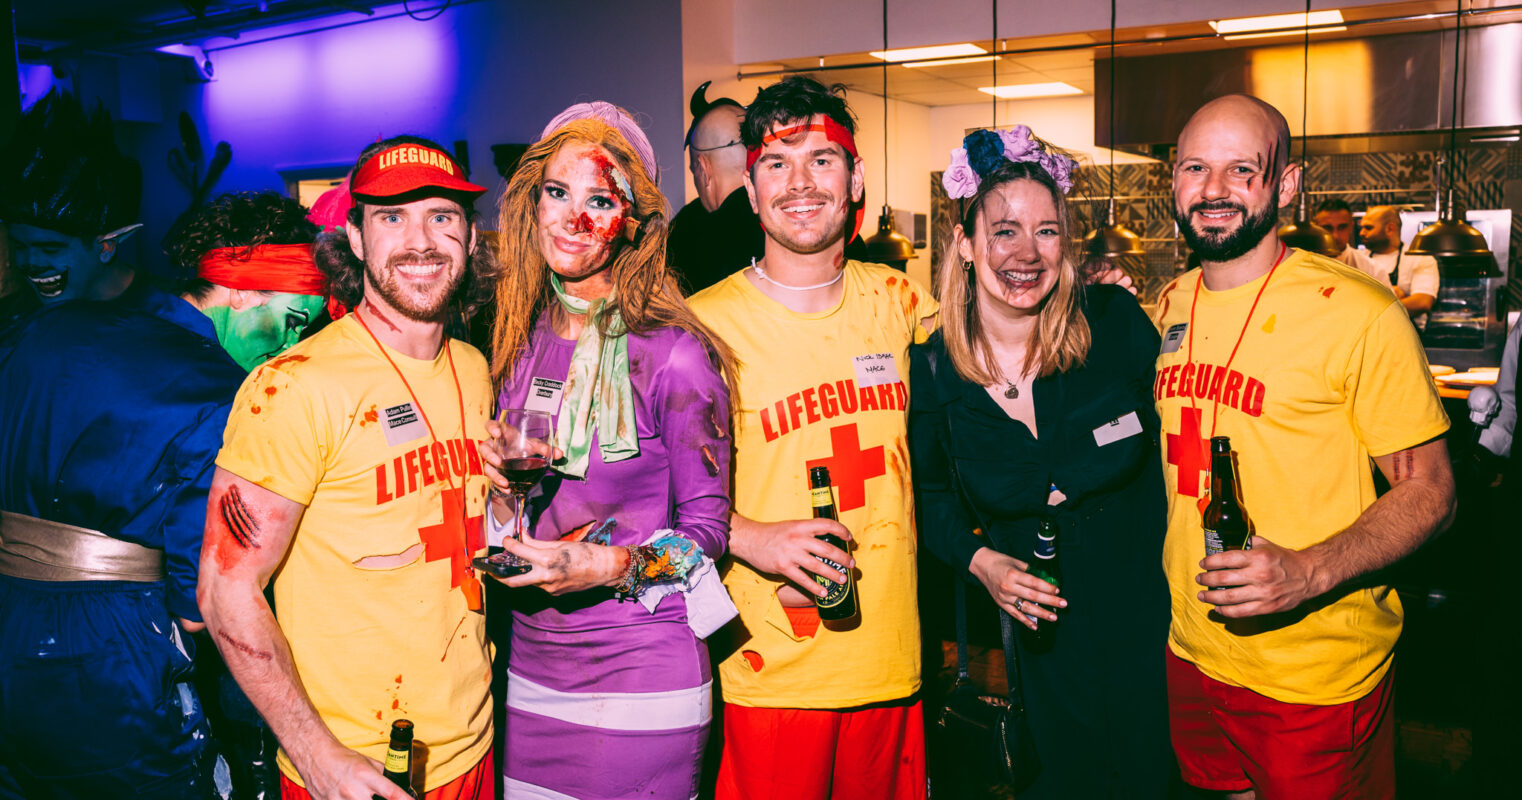 A group in lifeguard-themed costumes adds a humorous twist to the party atmosphere.